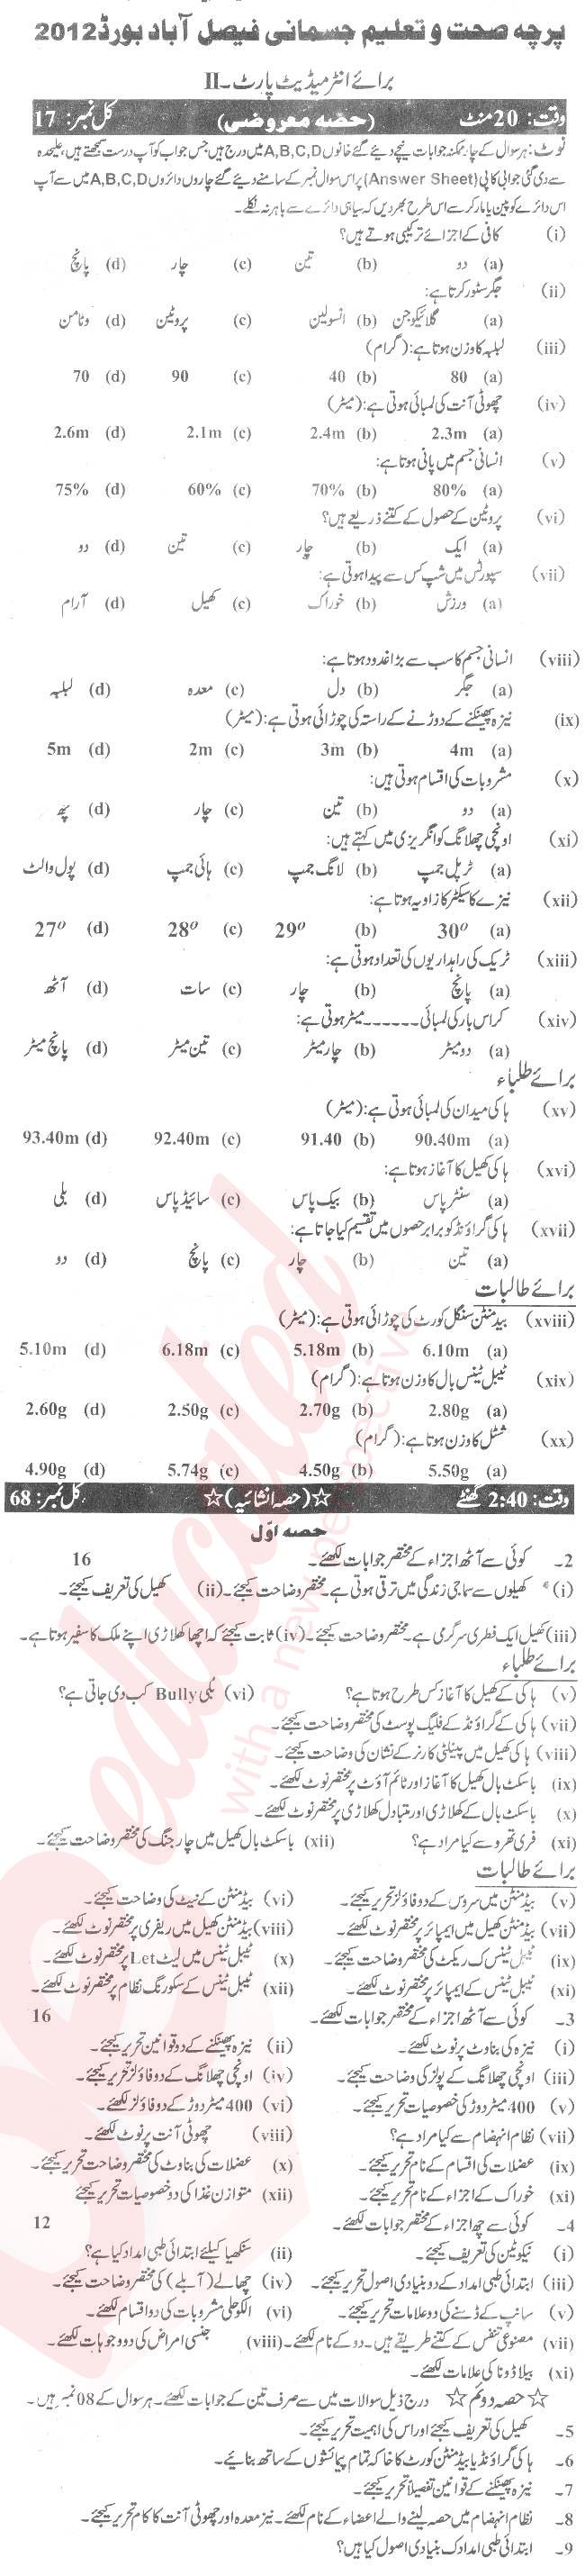 Health and Physical Education FA Part 2 Past Paper Group 1 BISE Faisalabad 2012